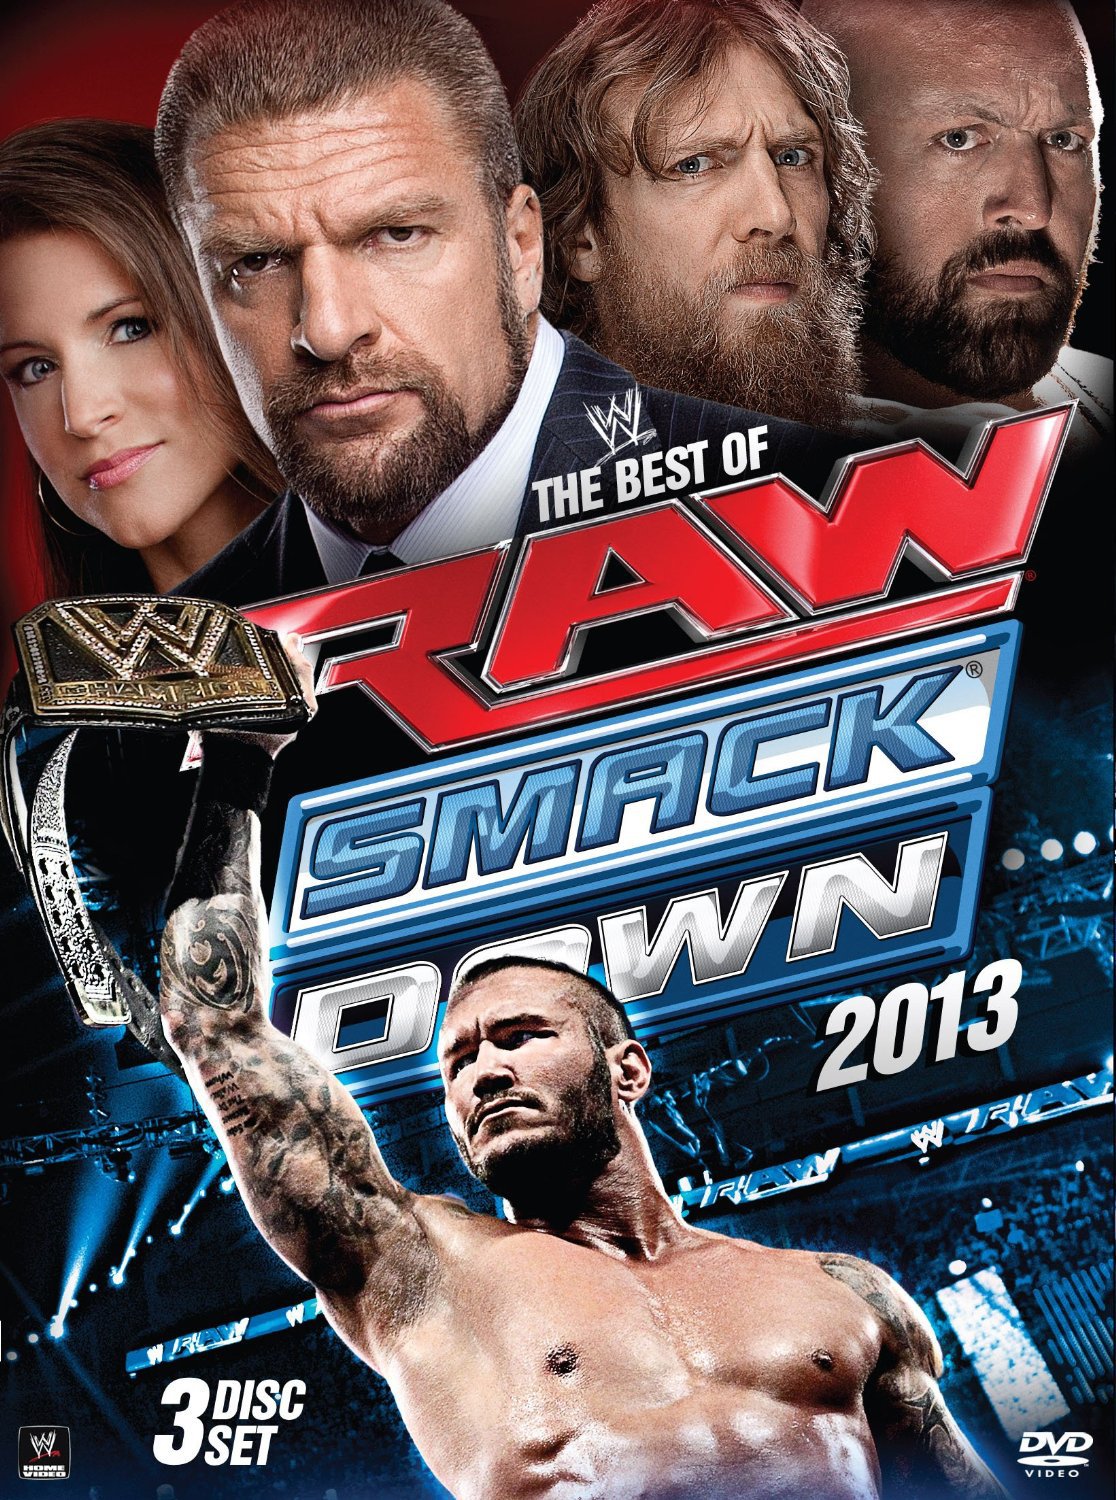 Best of RAW Smackdown 2013